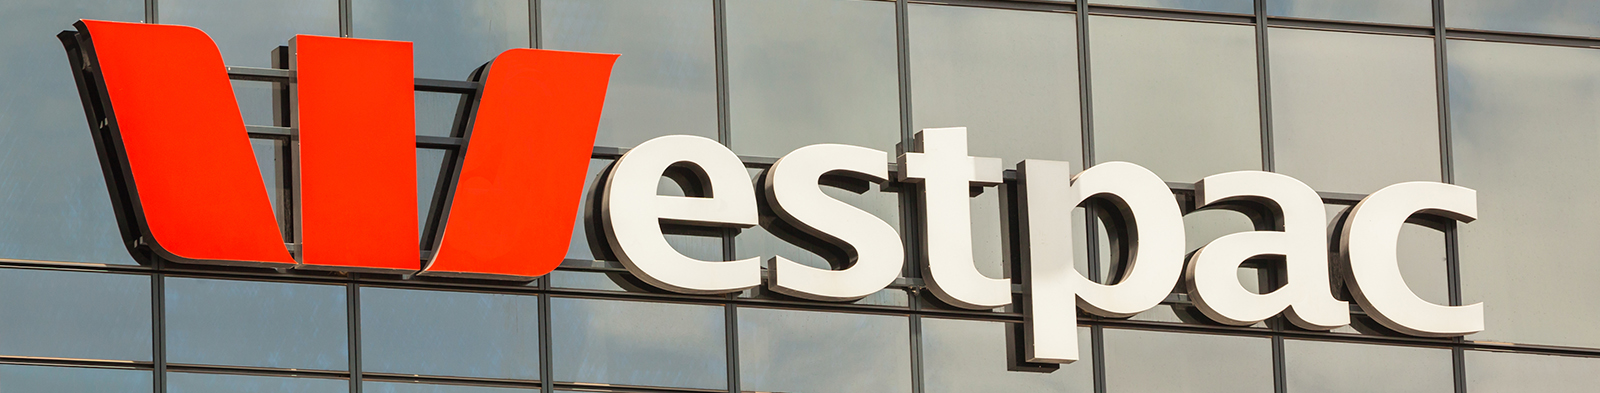 Westpac logo on outside of building